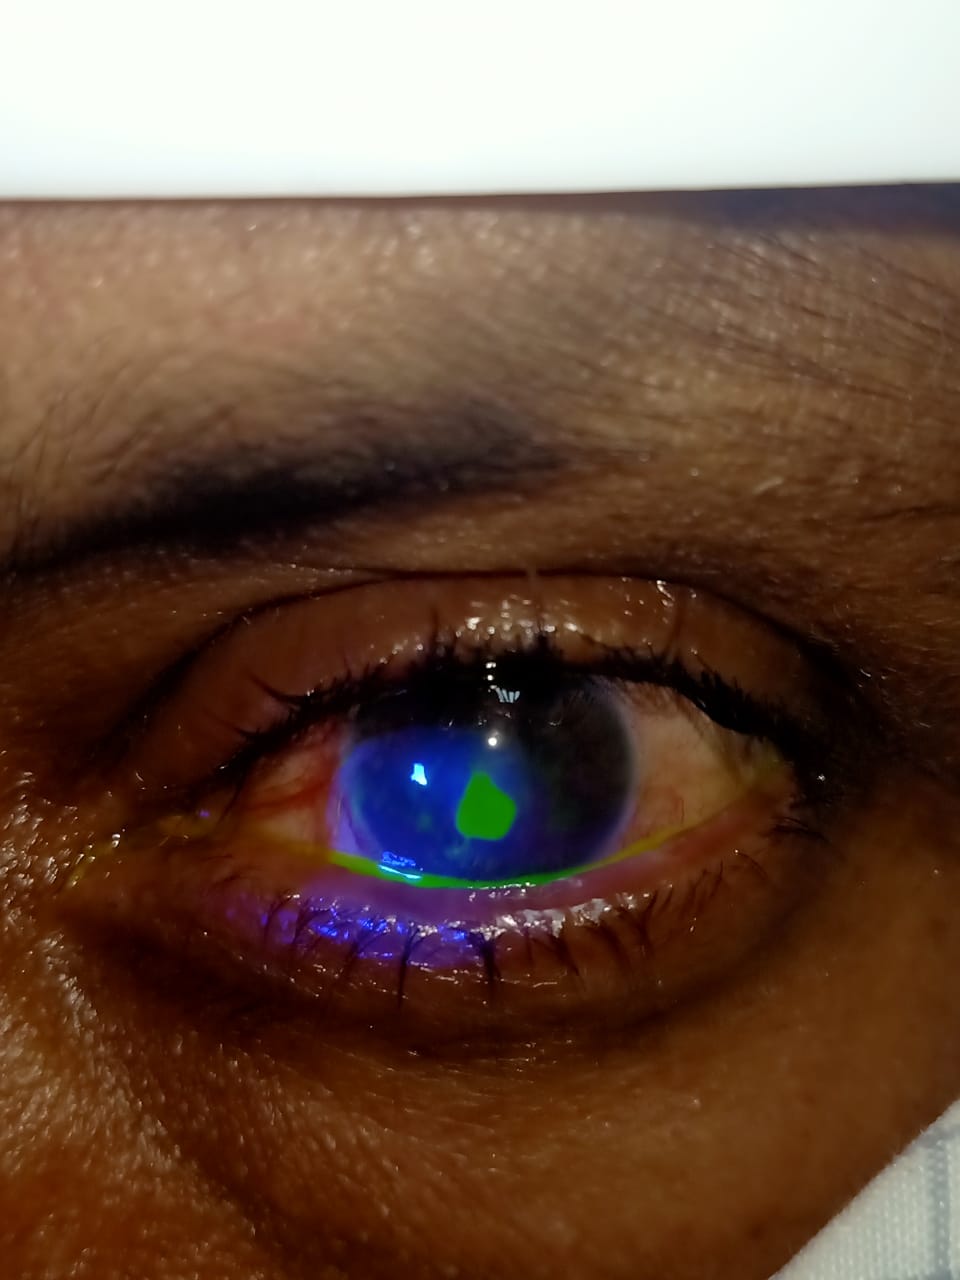 Digital image of the patient depicting central epithelial defect post overnight contact lens application